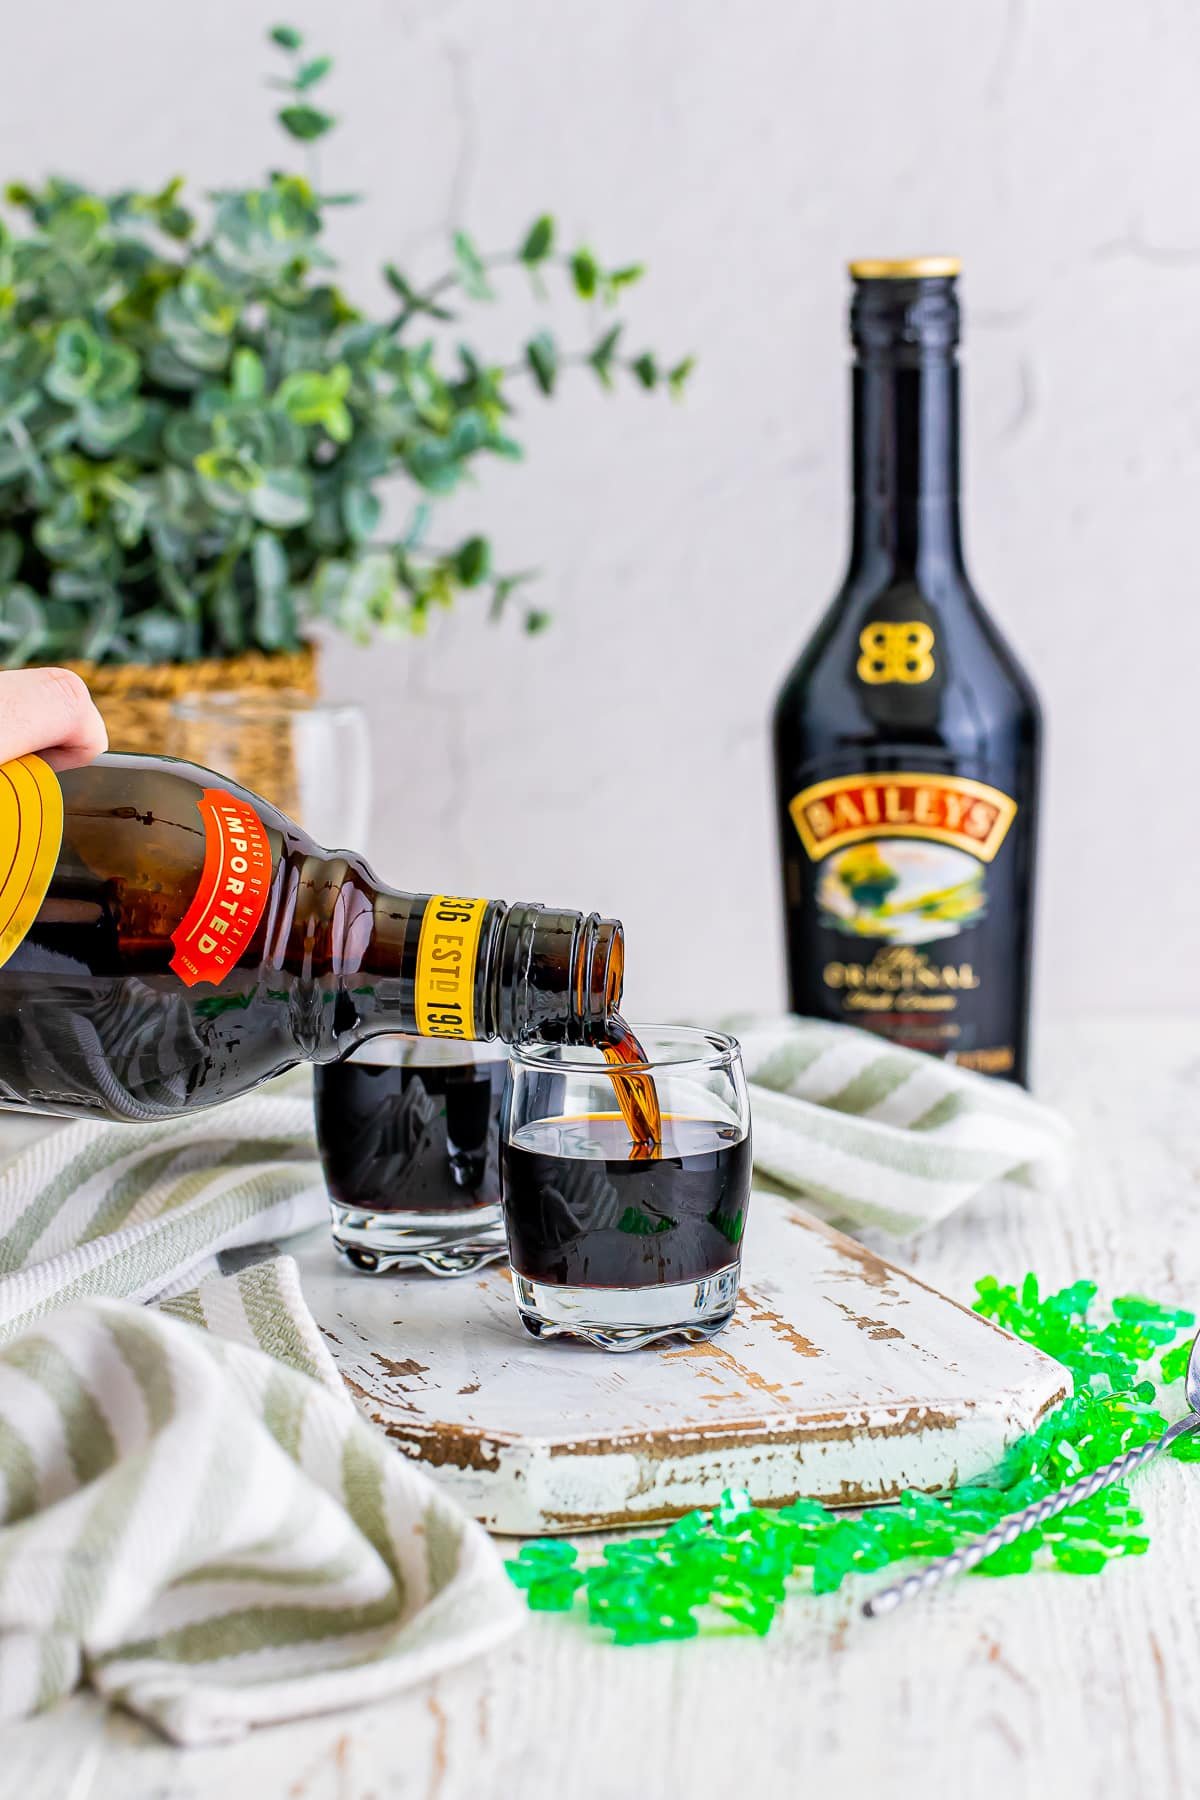 Kahlua being poured into a shot glass for Baby Guinness Shots on a white chipped wooden serving board, green festive necklace. Plant in wicker holder in background